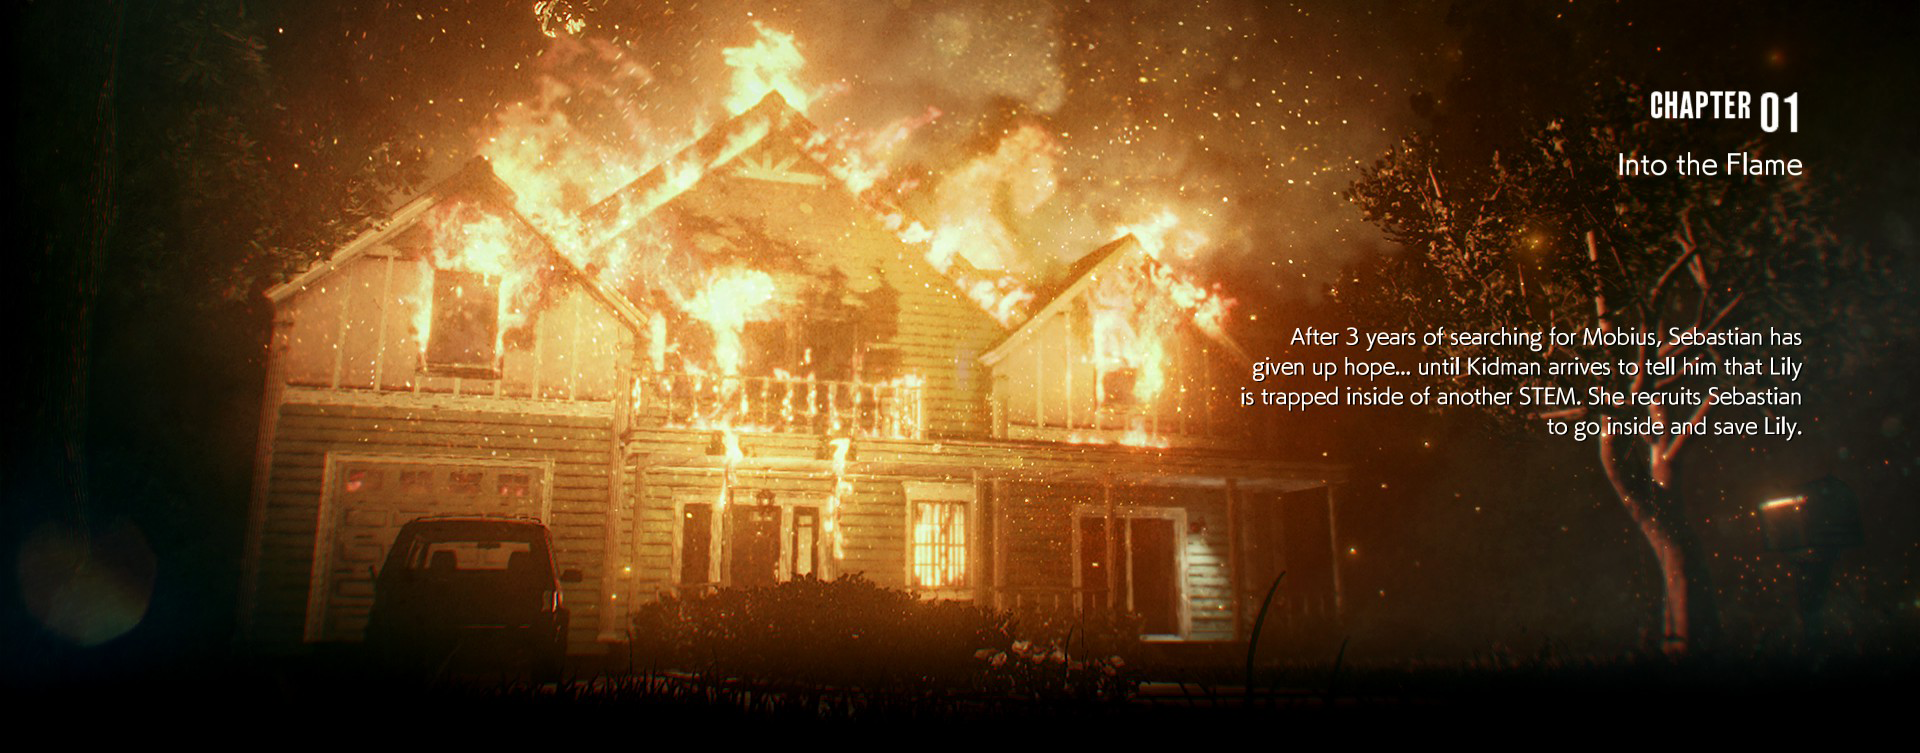 No More Playing With Fire achievement in The Evil Within 2